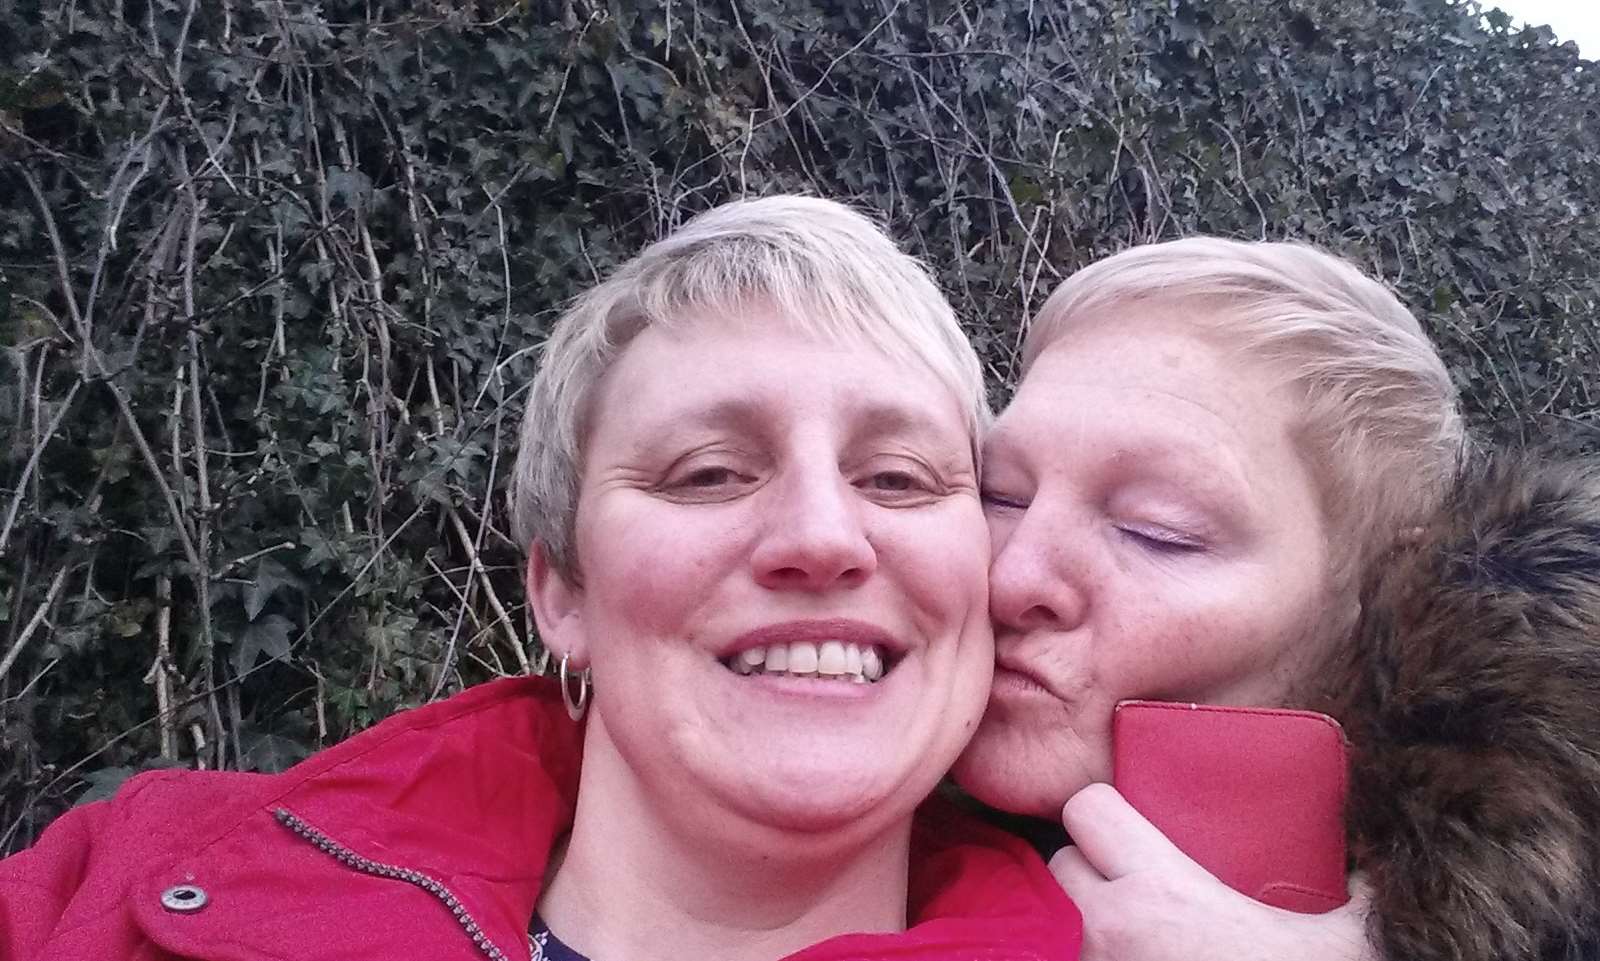 Gillian and Kim Carrington were the first couple in Medway to convert their civil partnership to a marriage